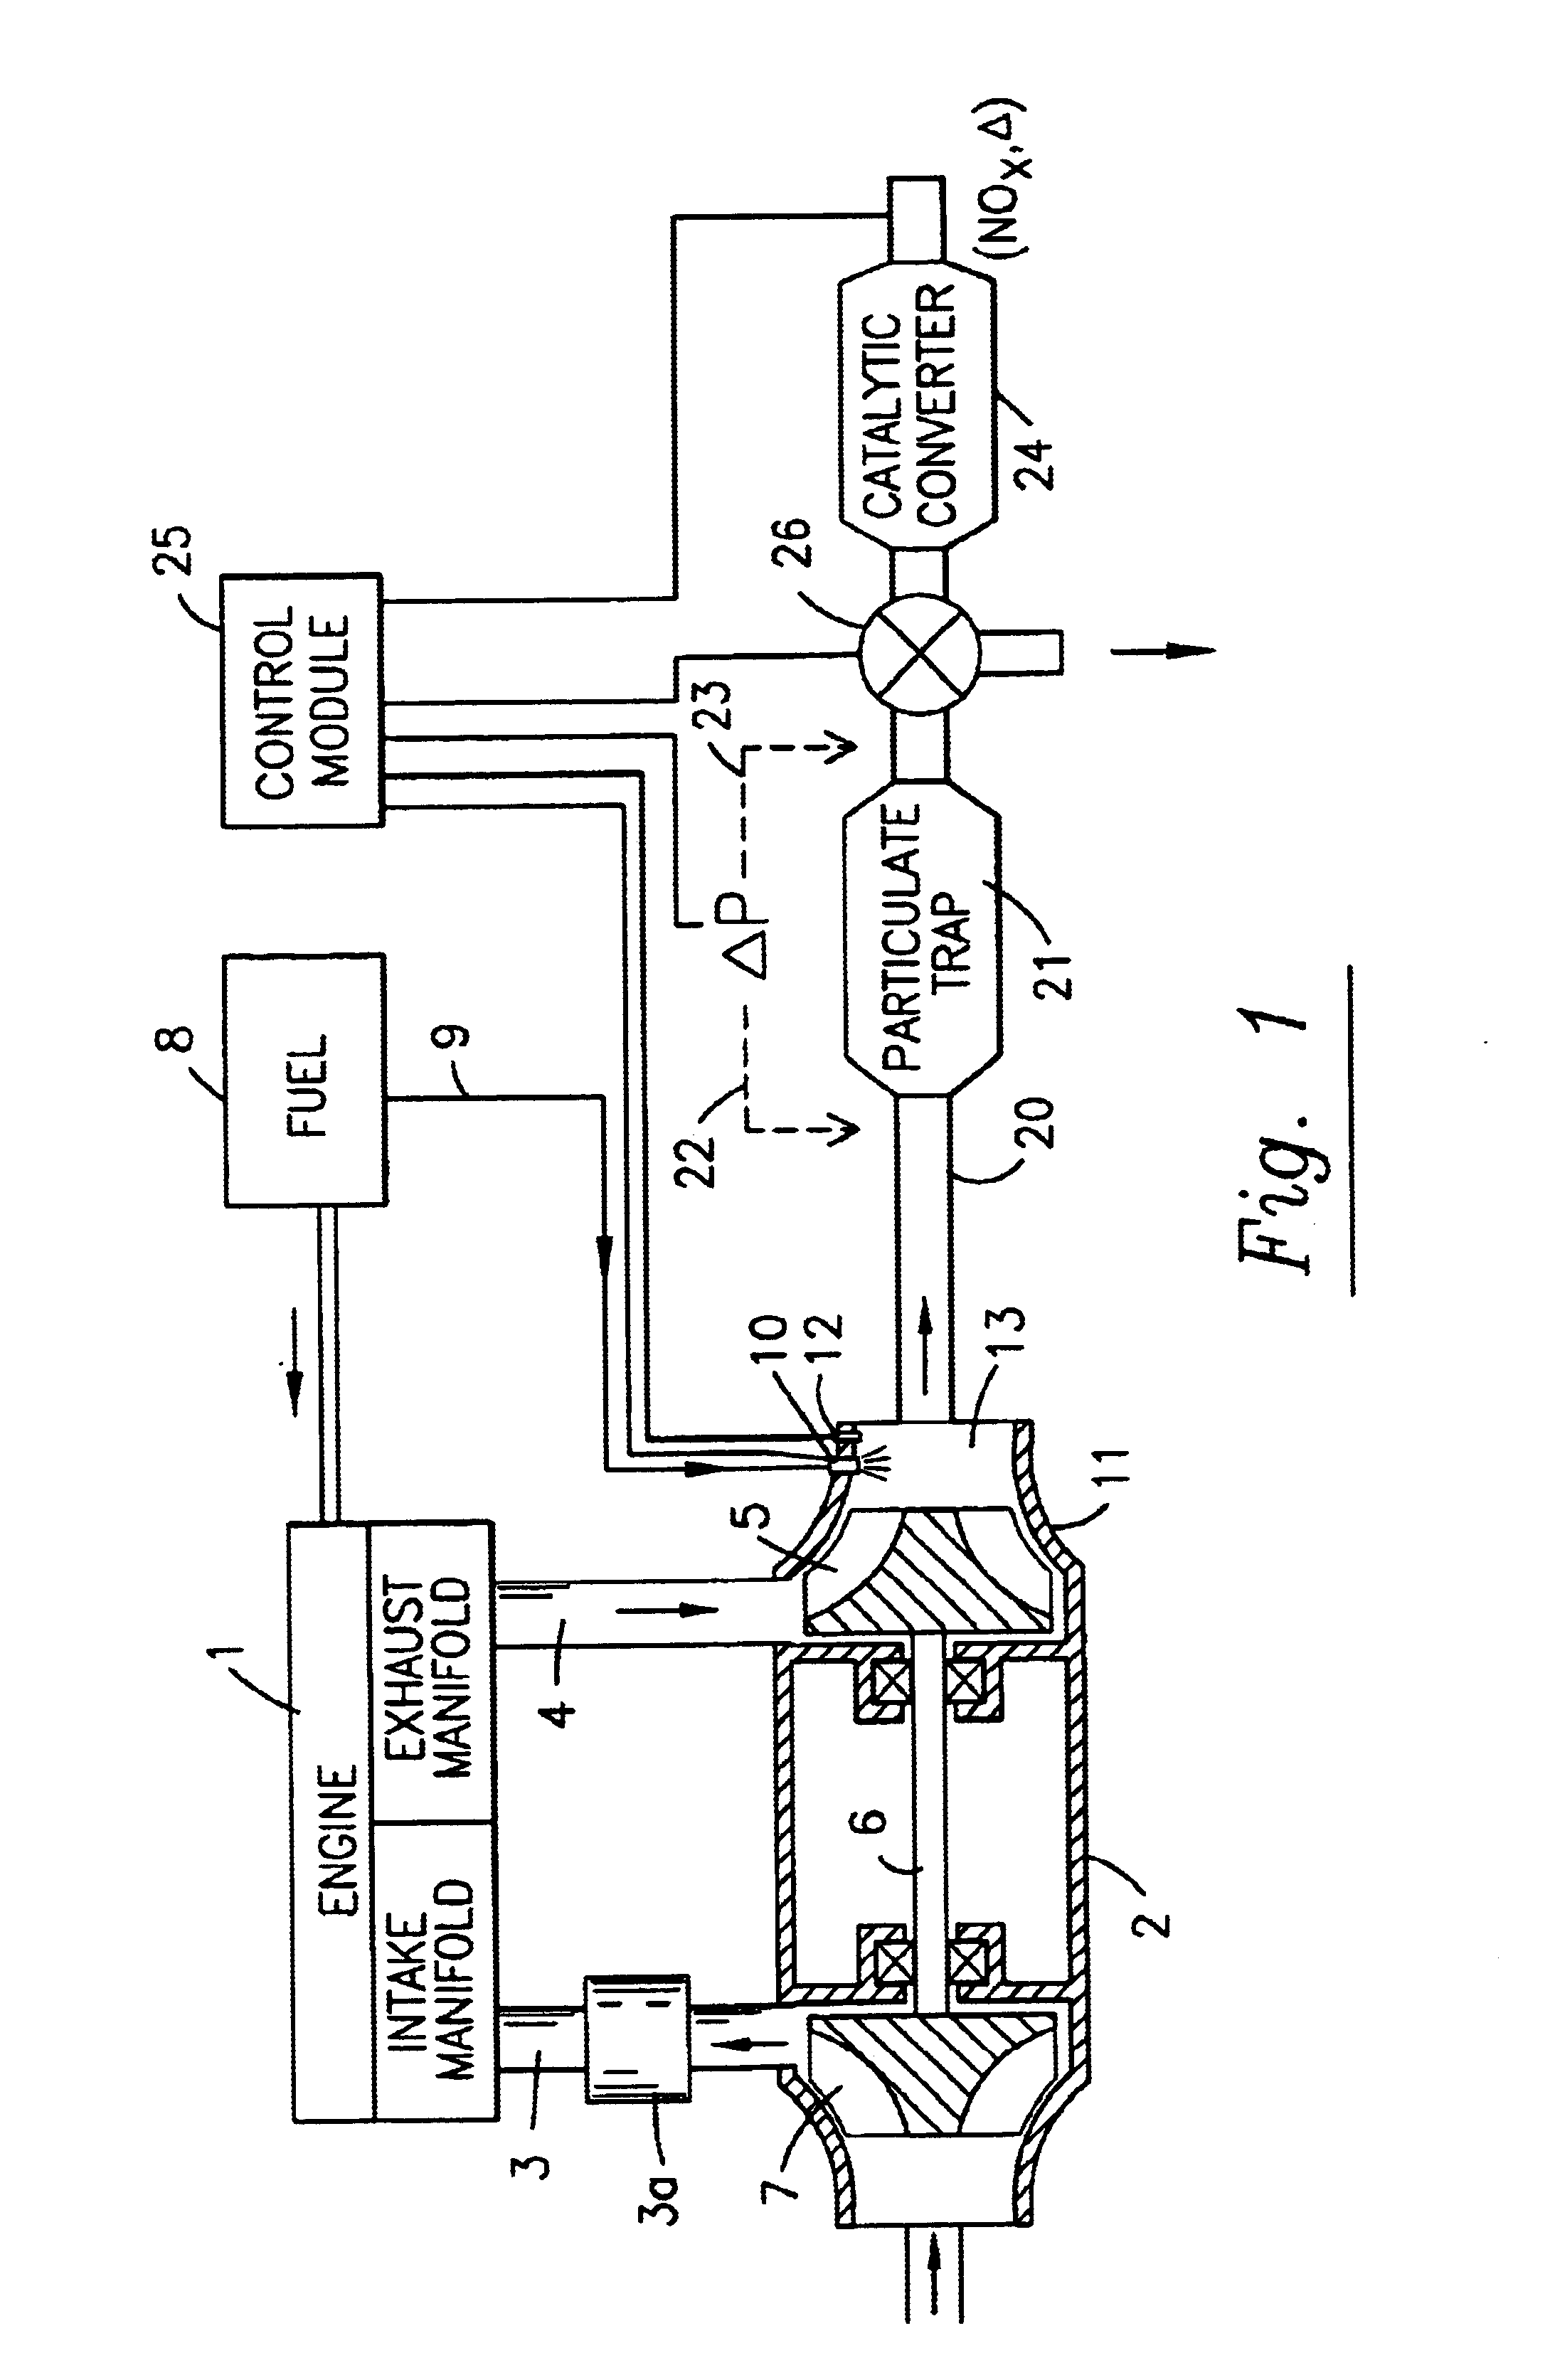 Secondary combustion for regeneration of catalyst and incineration of deposits in particle trap of vehicle exhaust